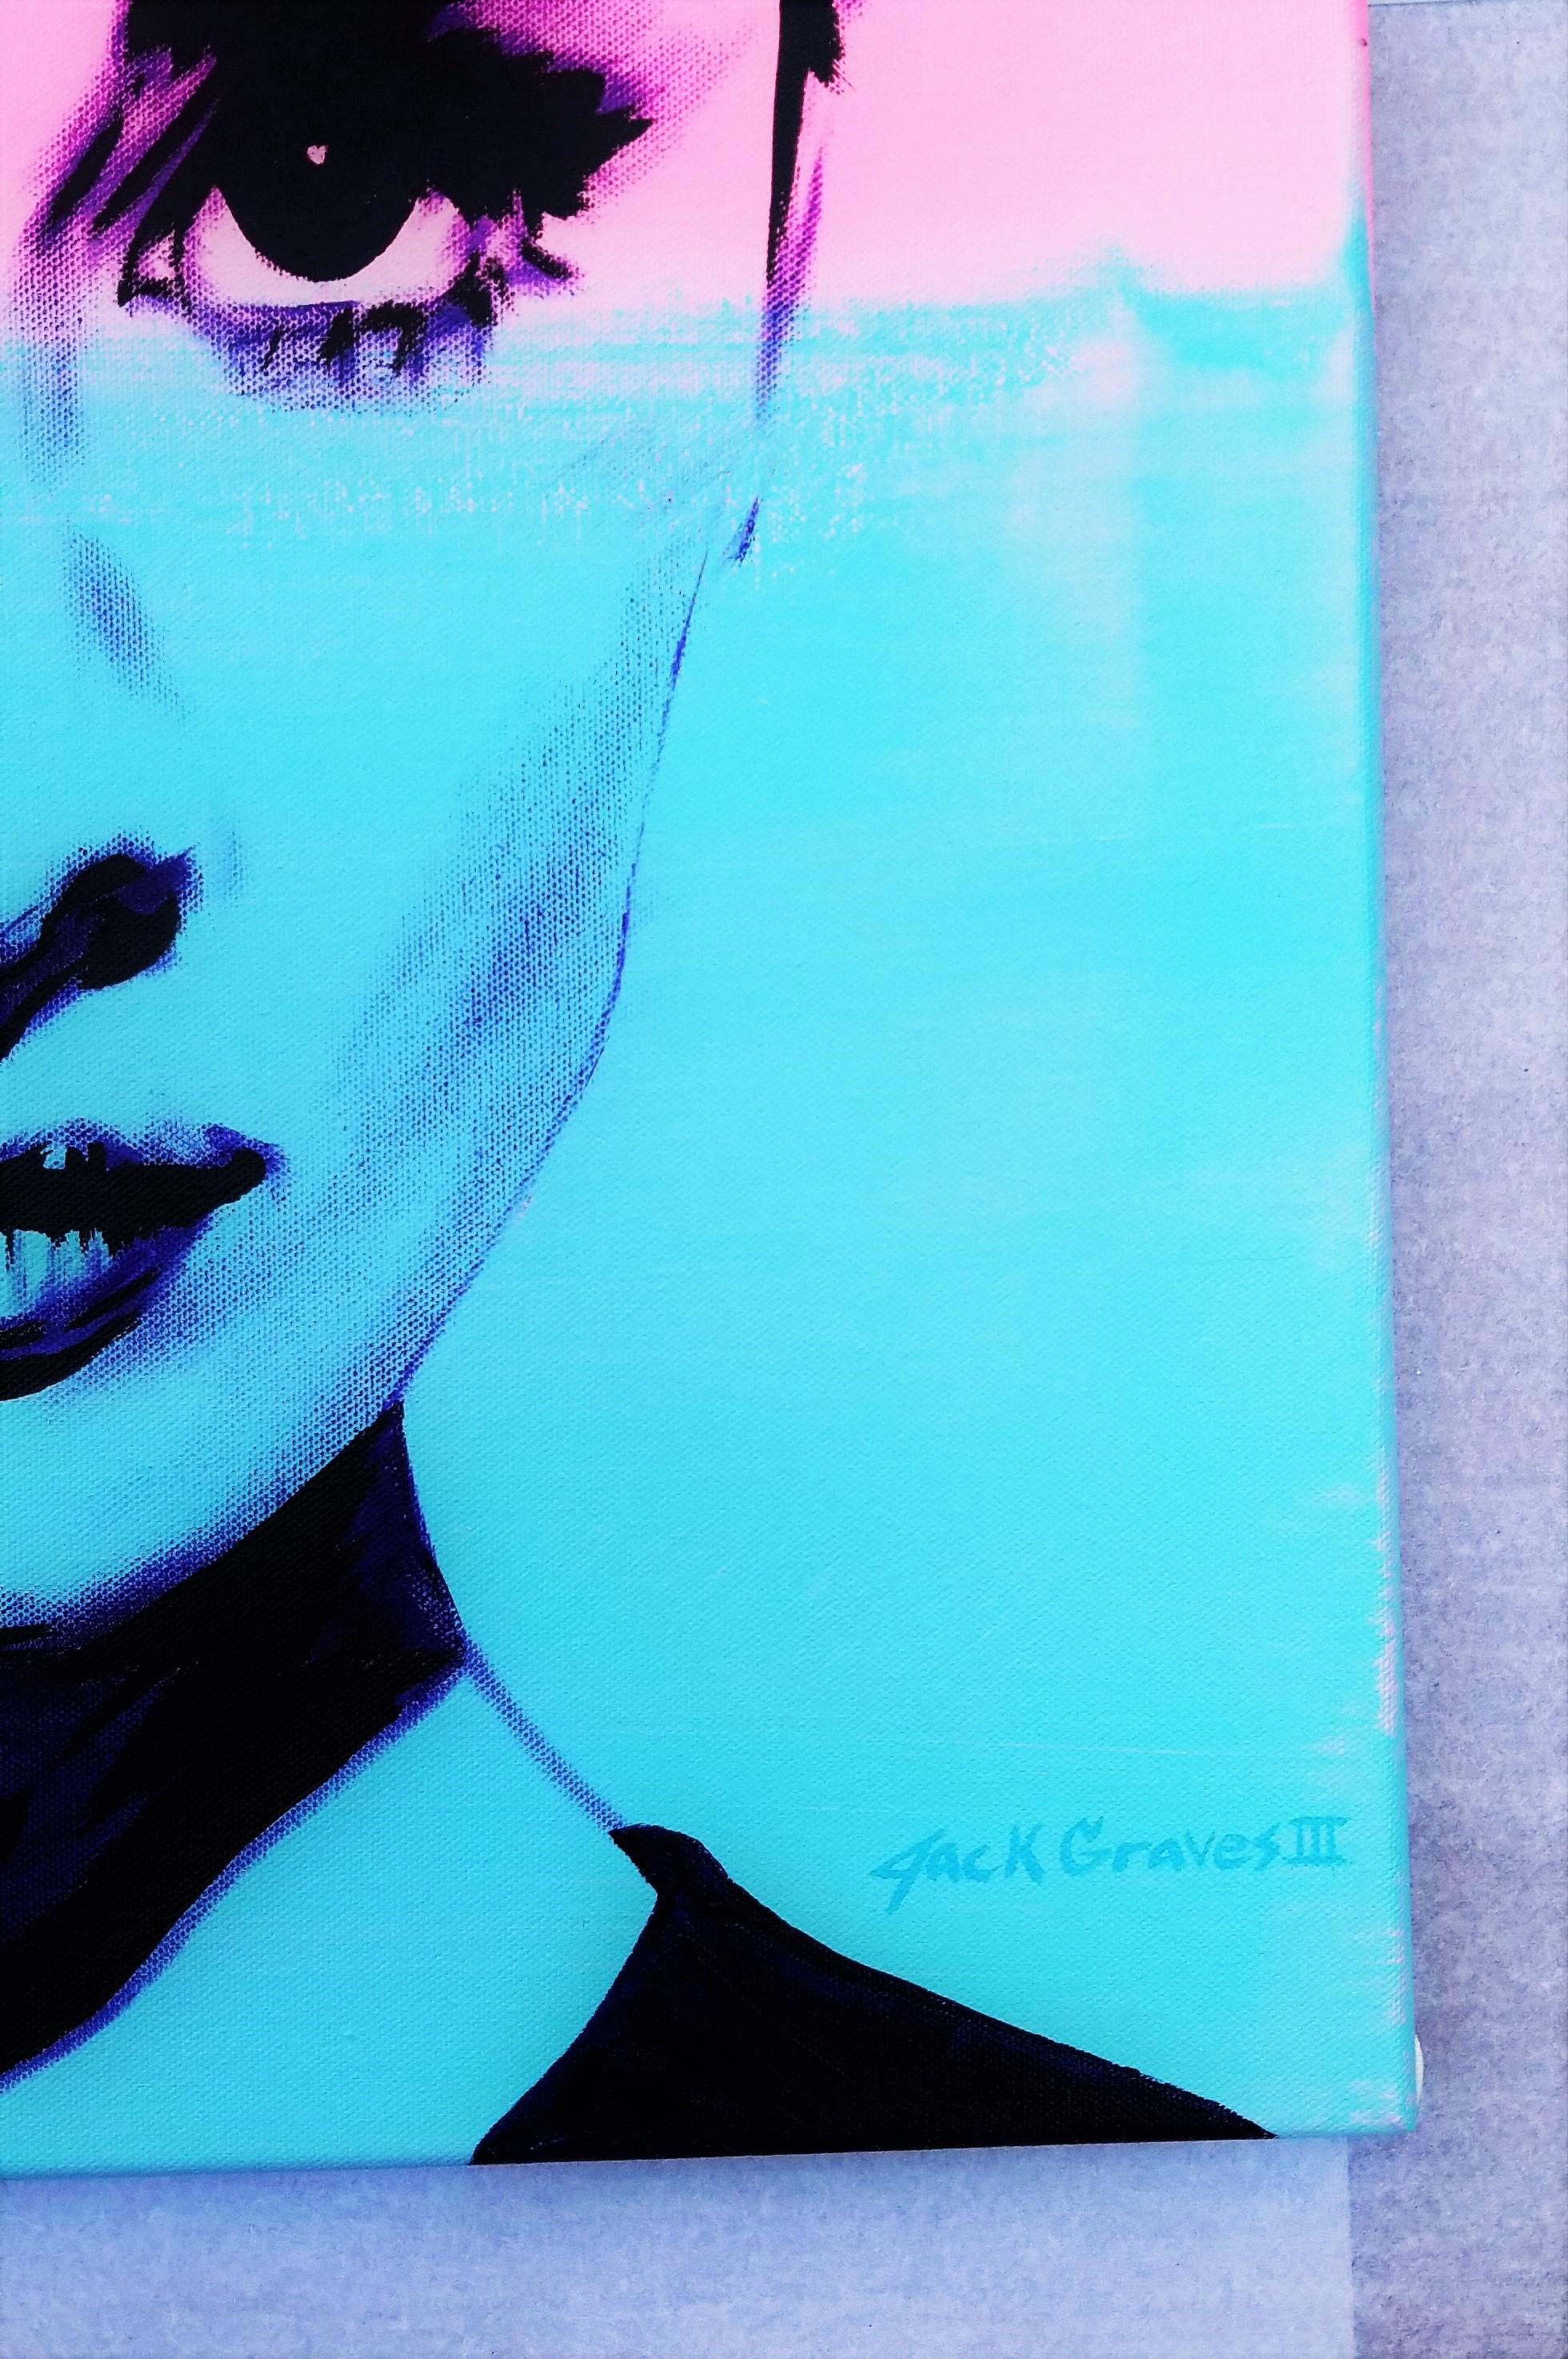 Audrey Hepburn Icon XII /// Contemporary Street Pop Art Actress Fashion Model  - Black Portrait Painting by Jack Graves III